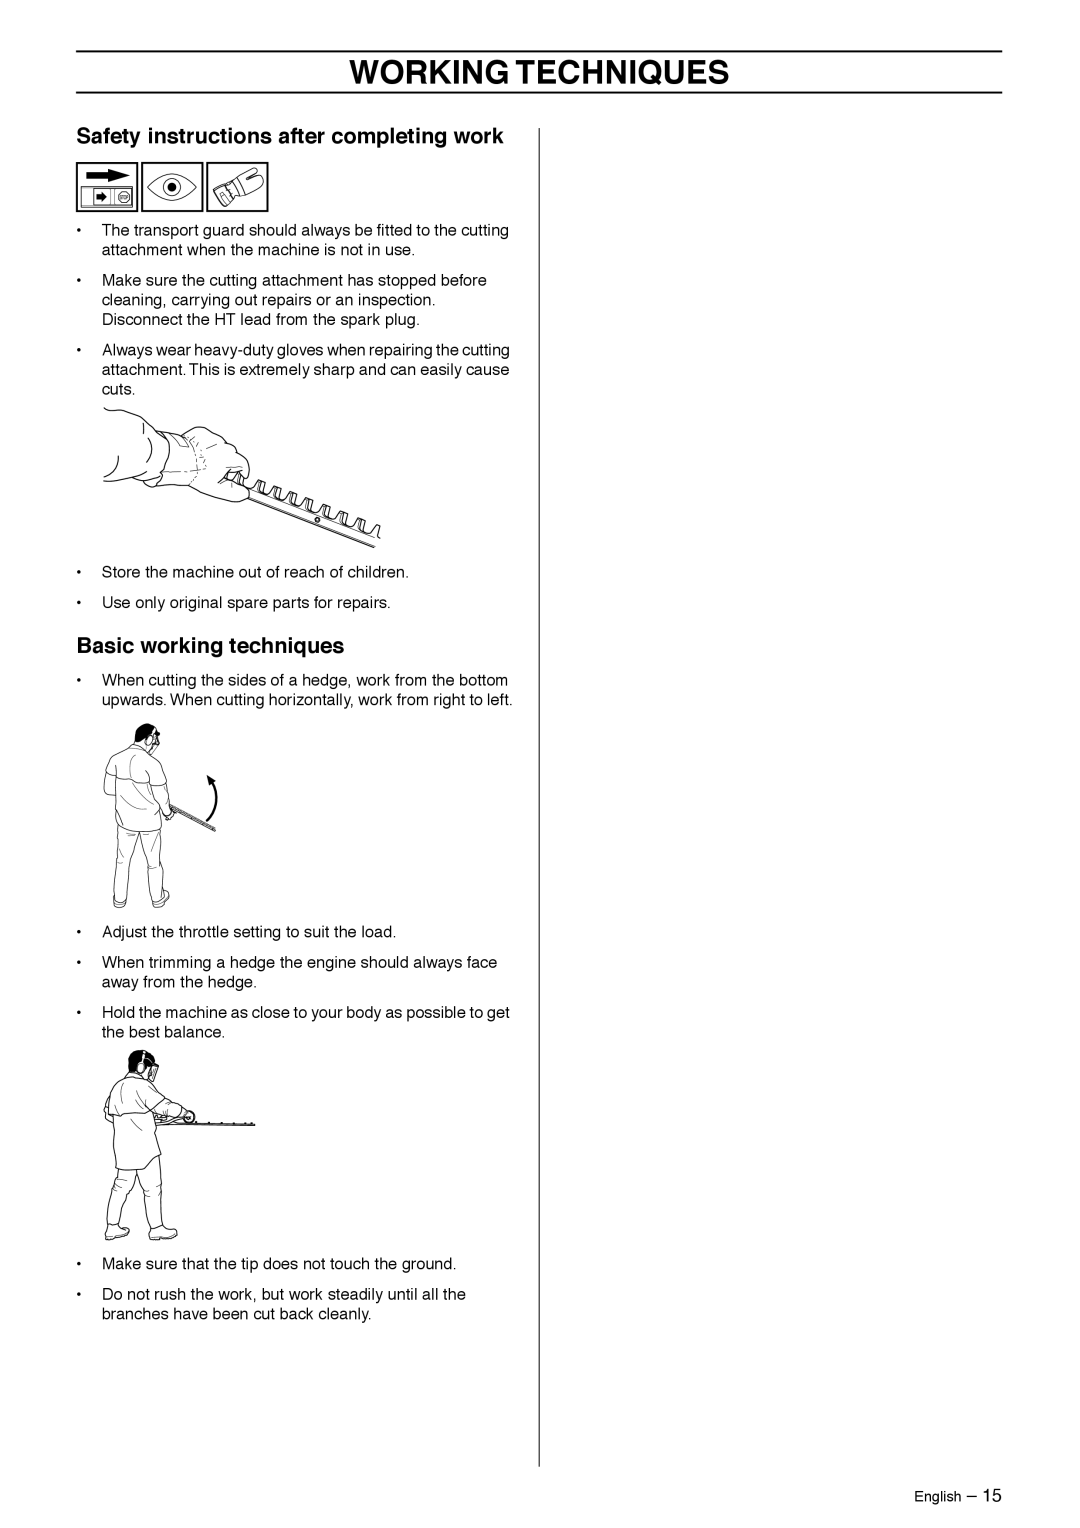 Husqvarna 325HS75X-Series manual Safety instructions after completing work, Basic working techniques, Working Techniques 